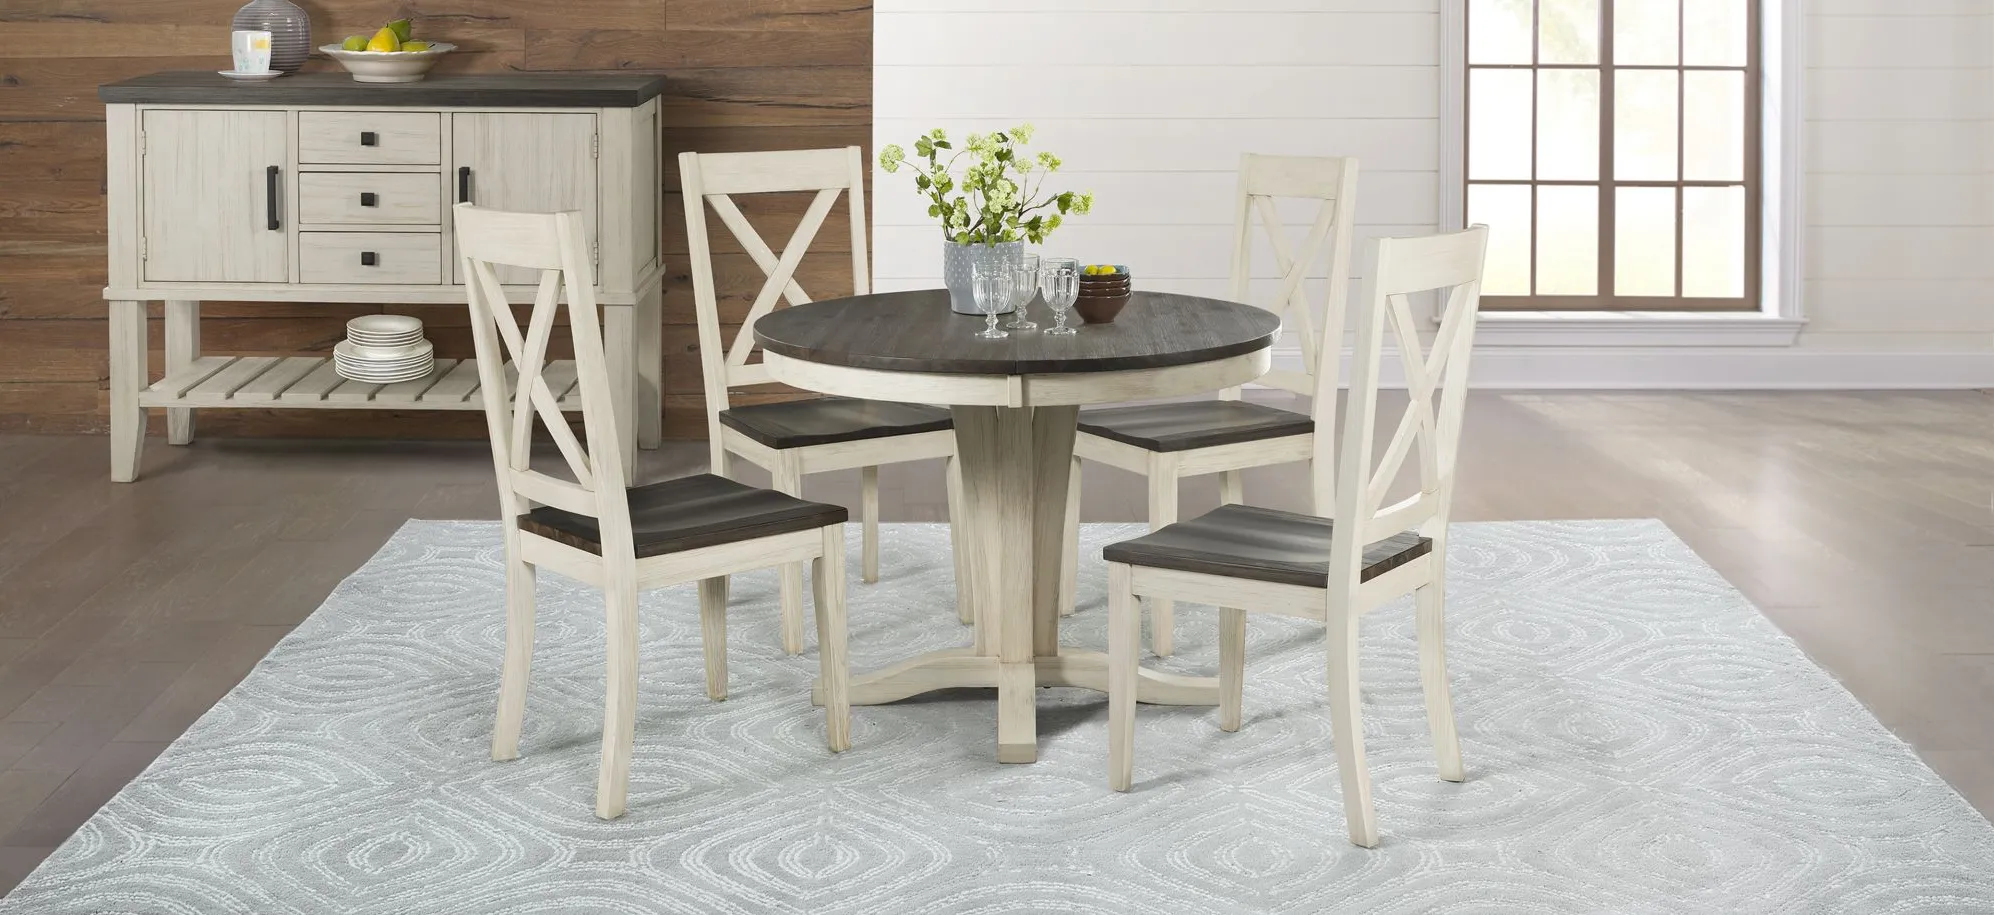 Huron 5-pc. Round X-Back Dining Set in Chalk-Cocoa Bean by A-America